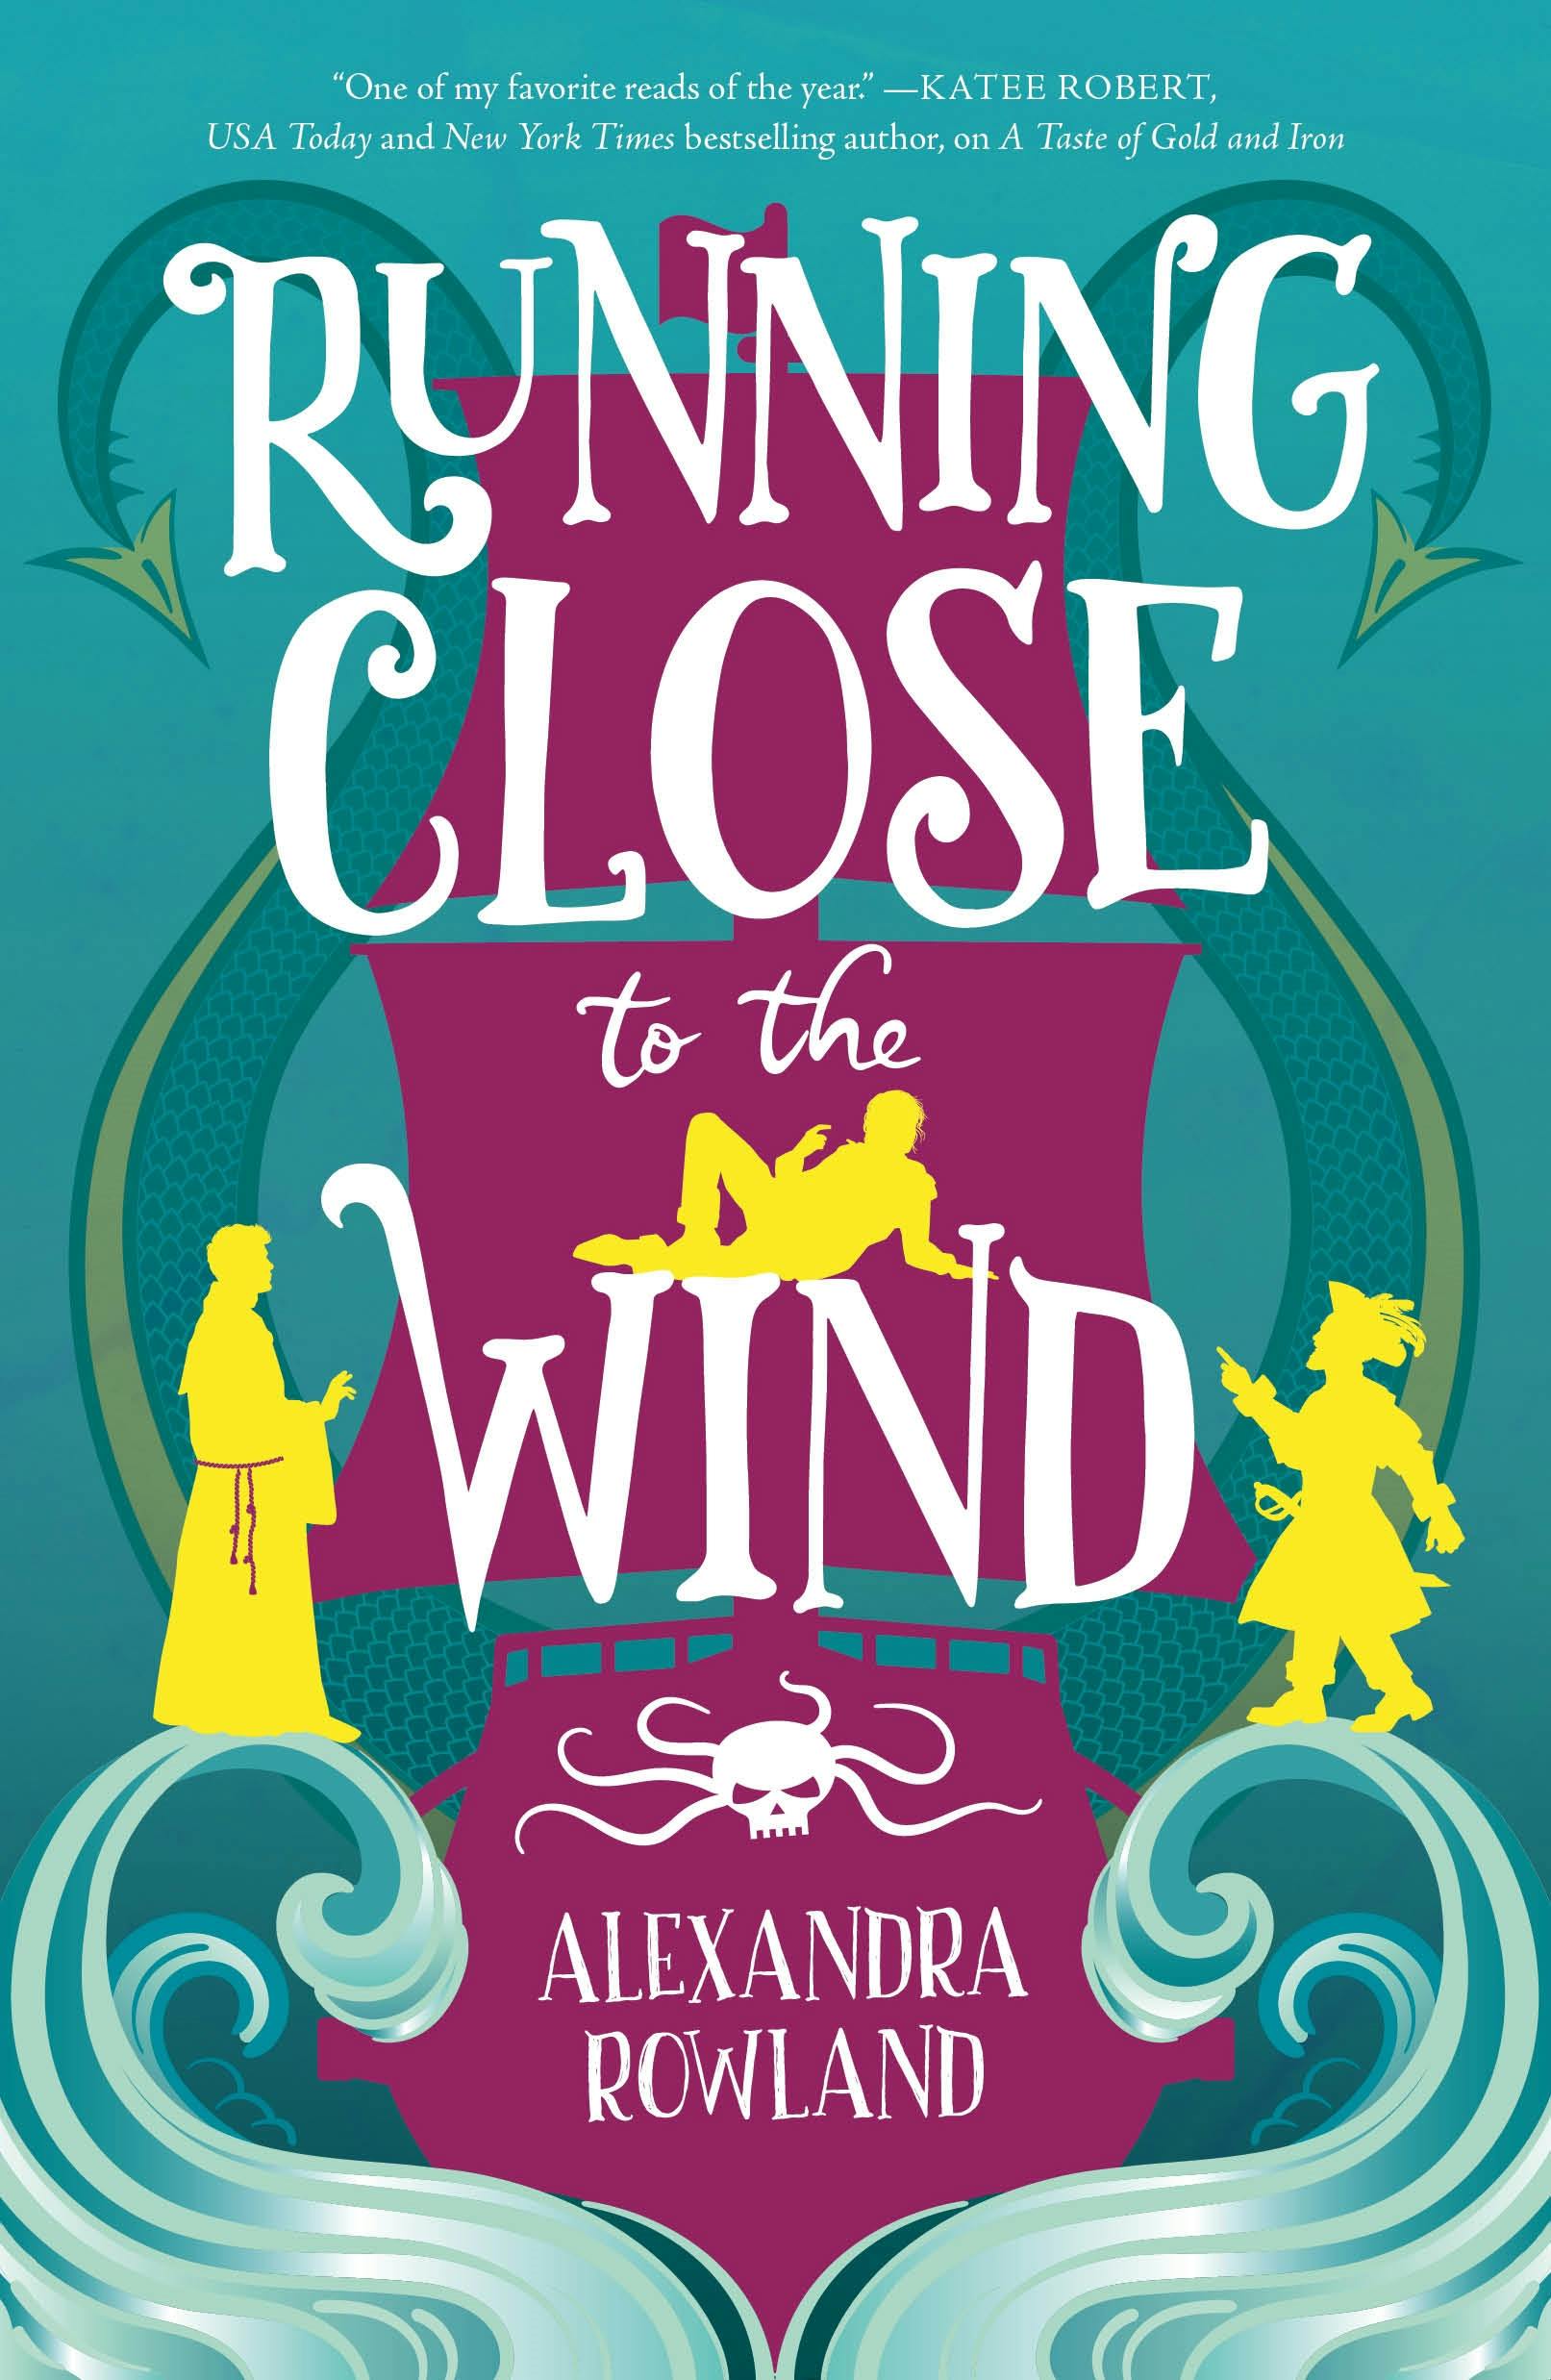 Cover for the book titled as: Running Close to the Wind